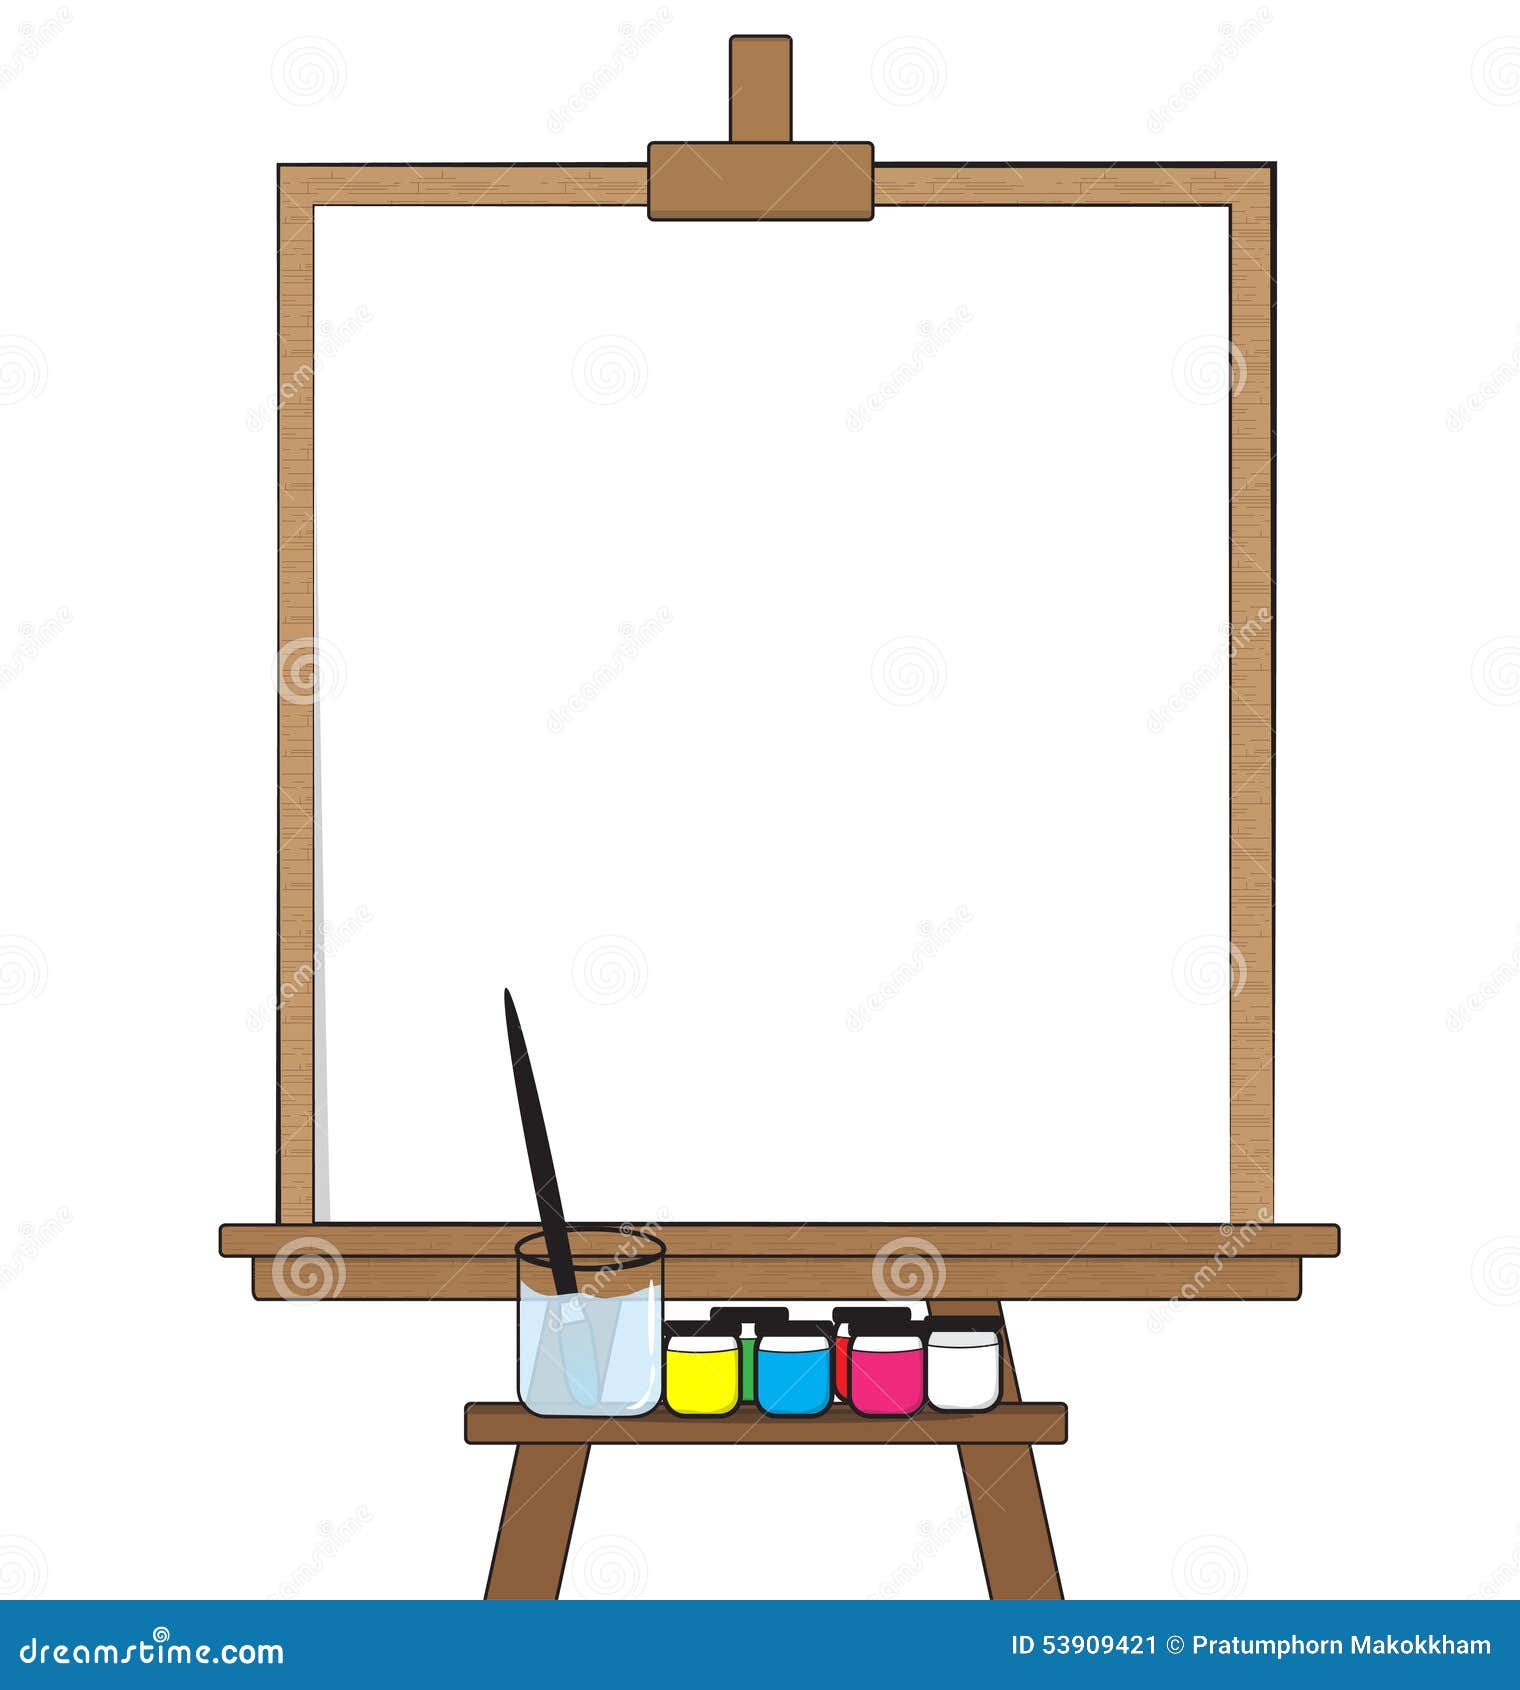 Drawing board stock vector. Illustration of easel, tools - 53909421